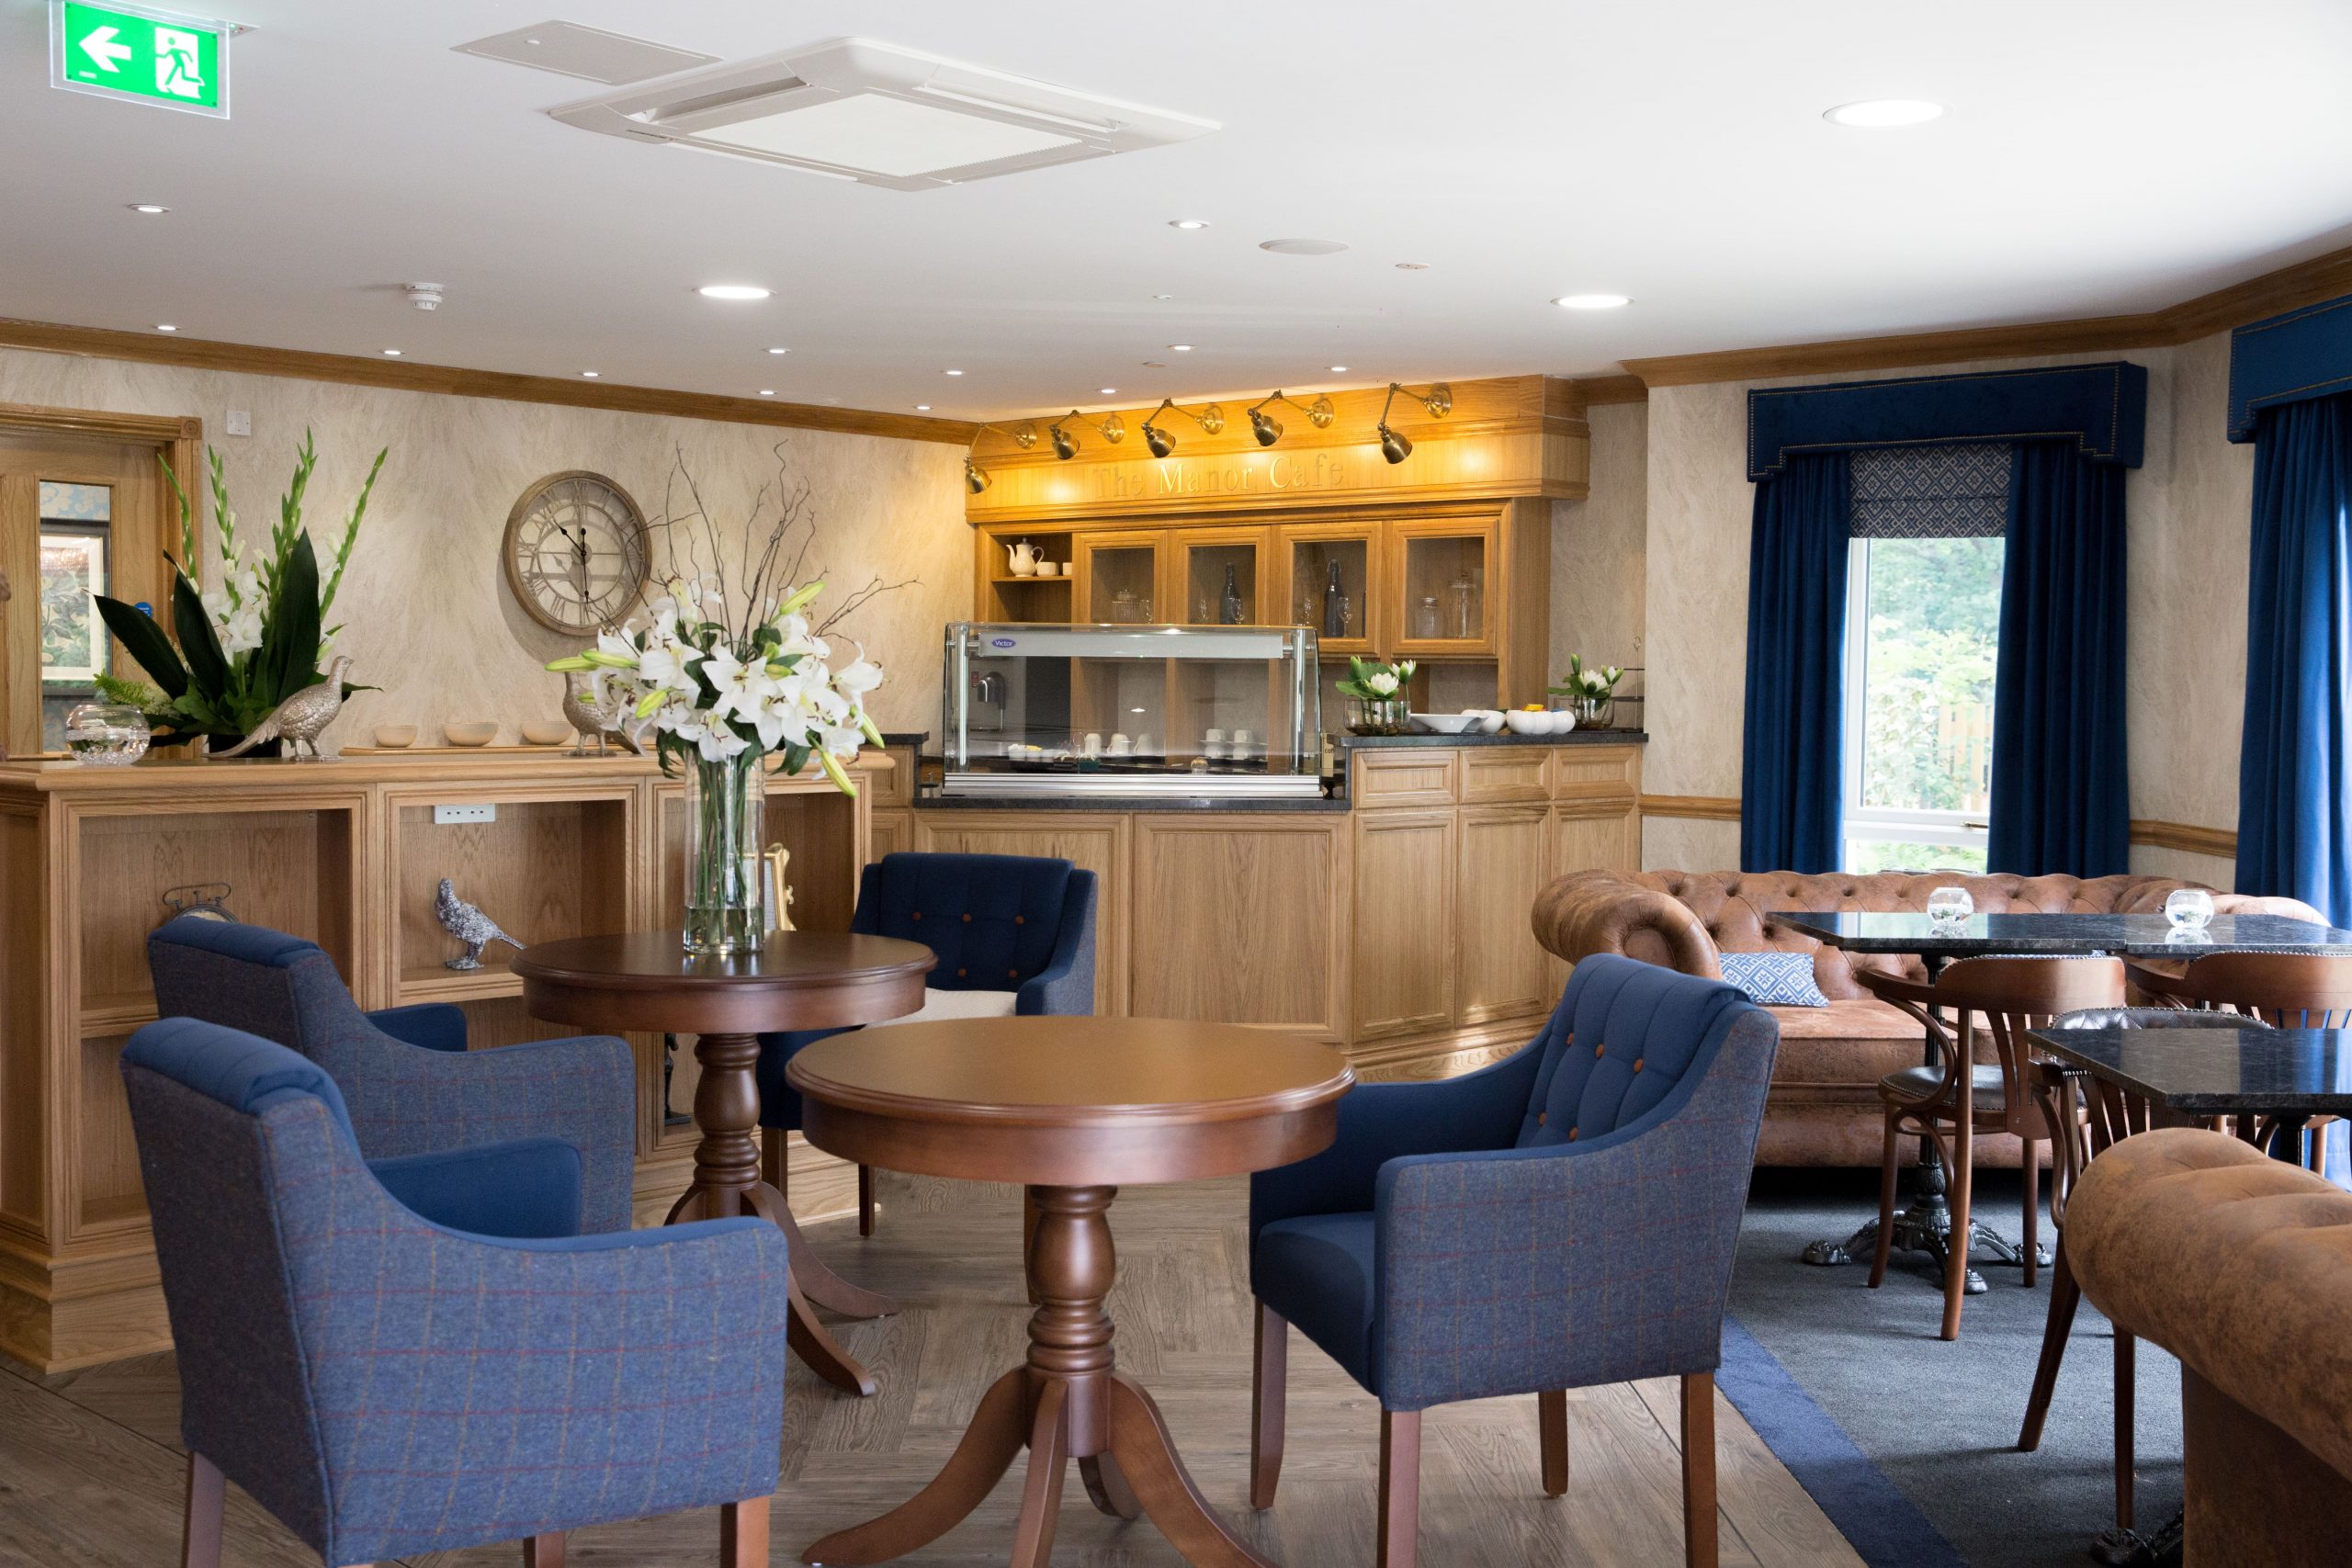 Cuffley Manor care home cafe Northaw